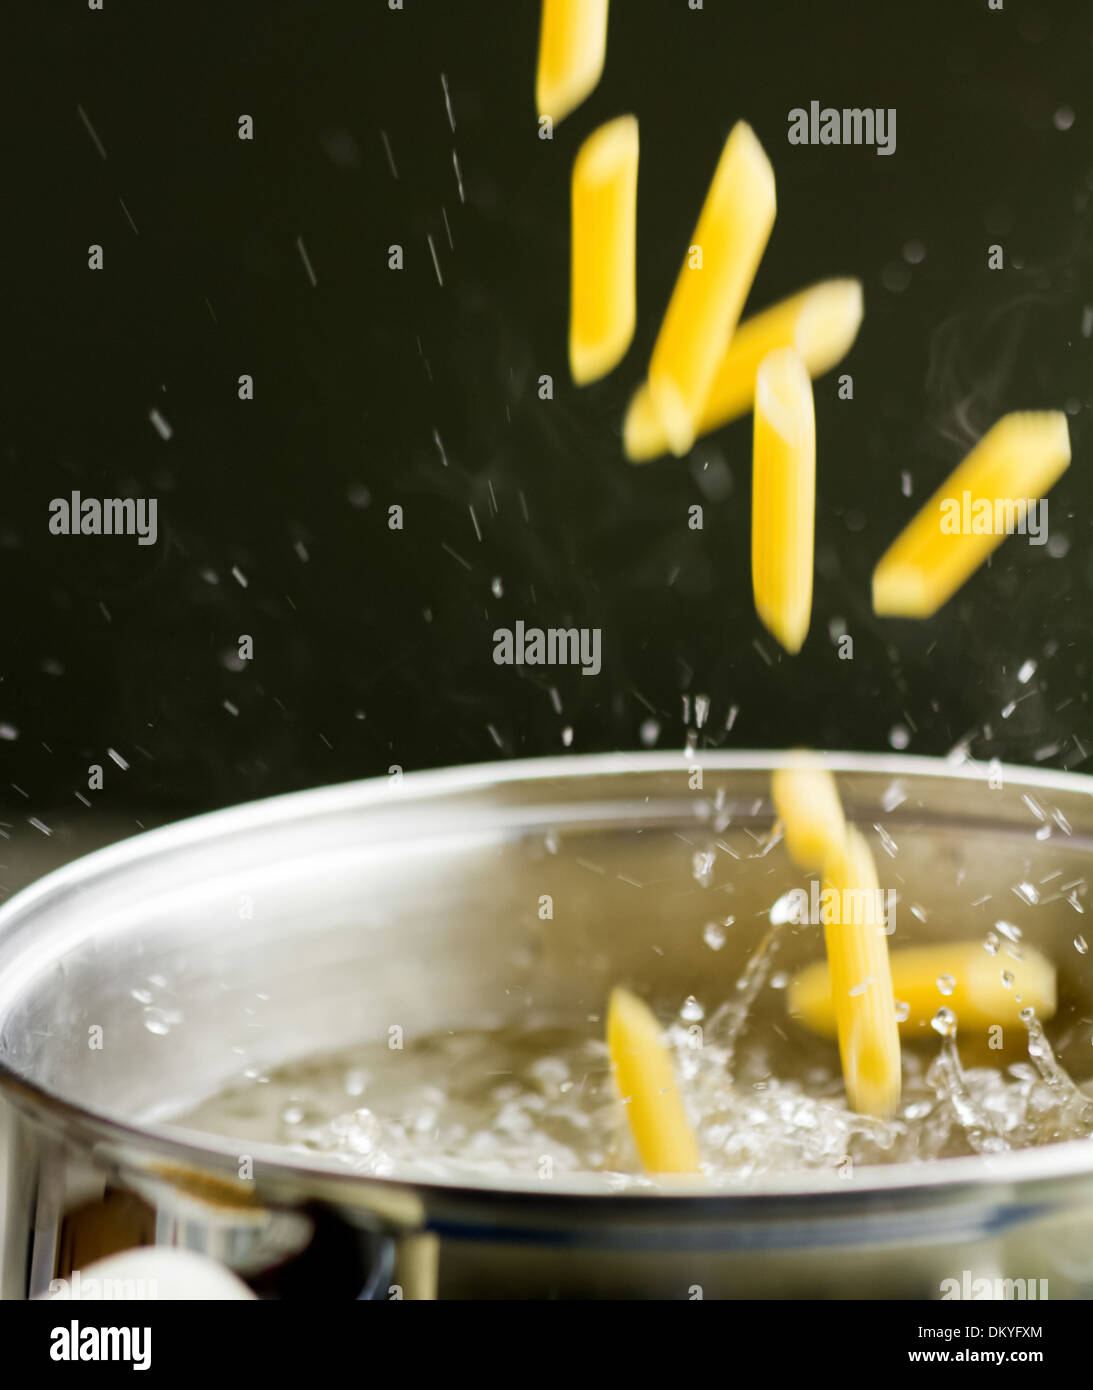 Dropping dry penne pasta tubes into boiling water Stock Photo